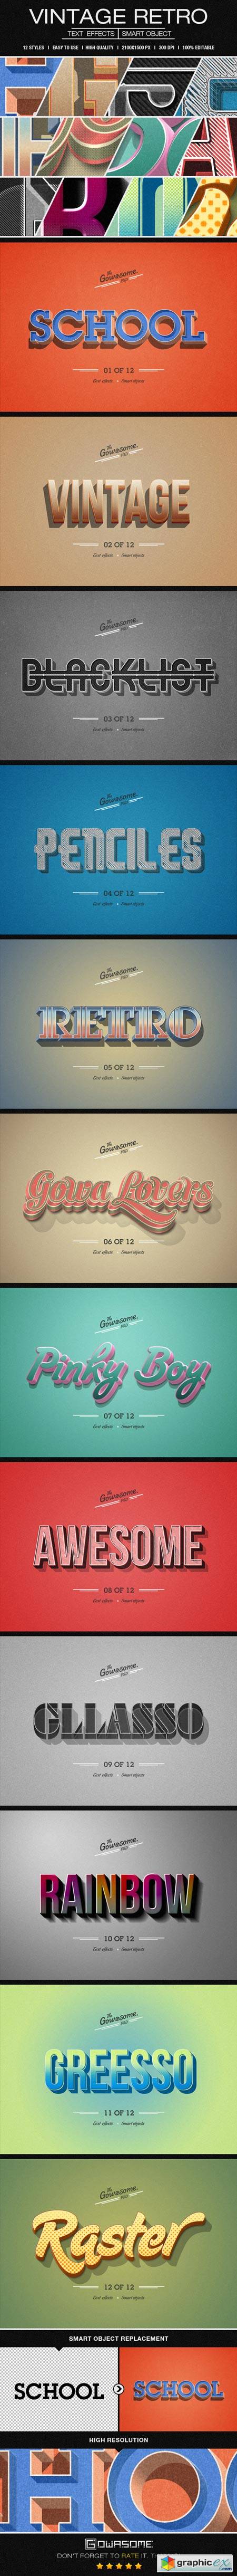 Retro Vintage Text Effects 8809603